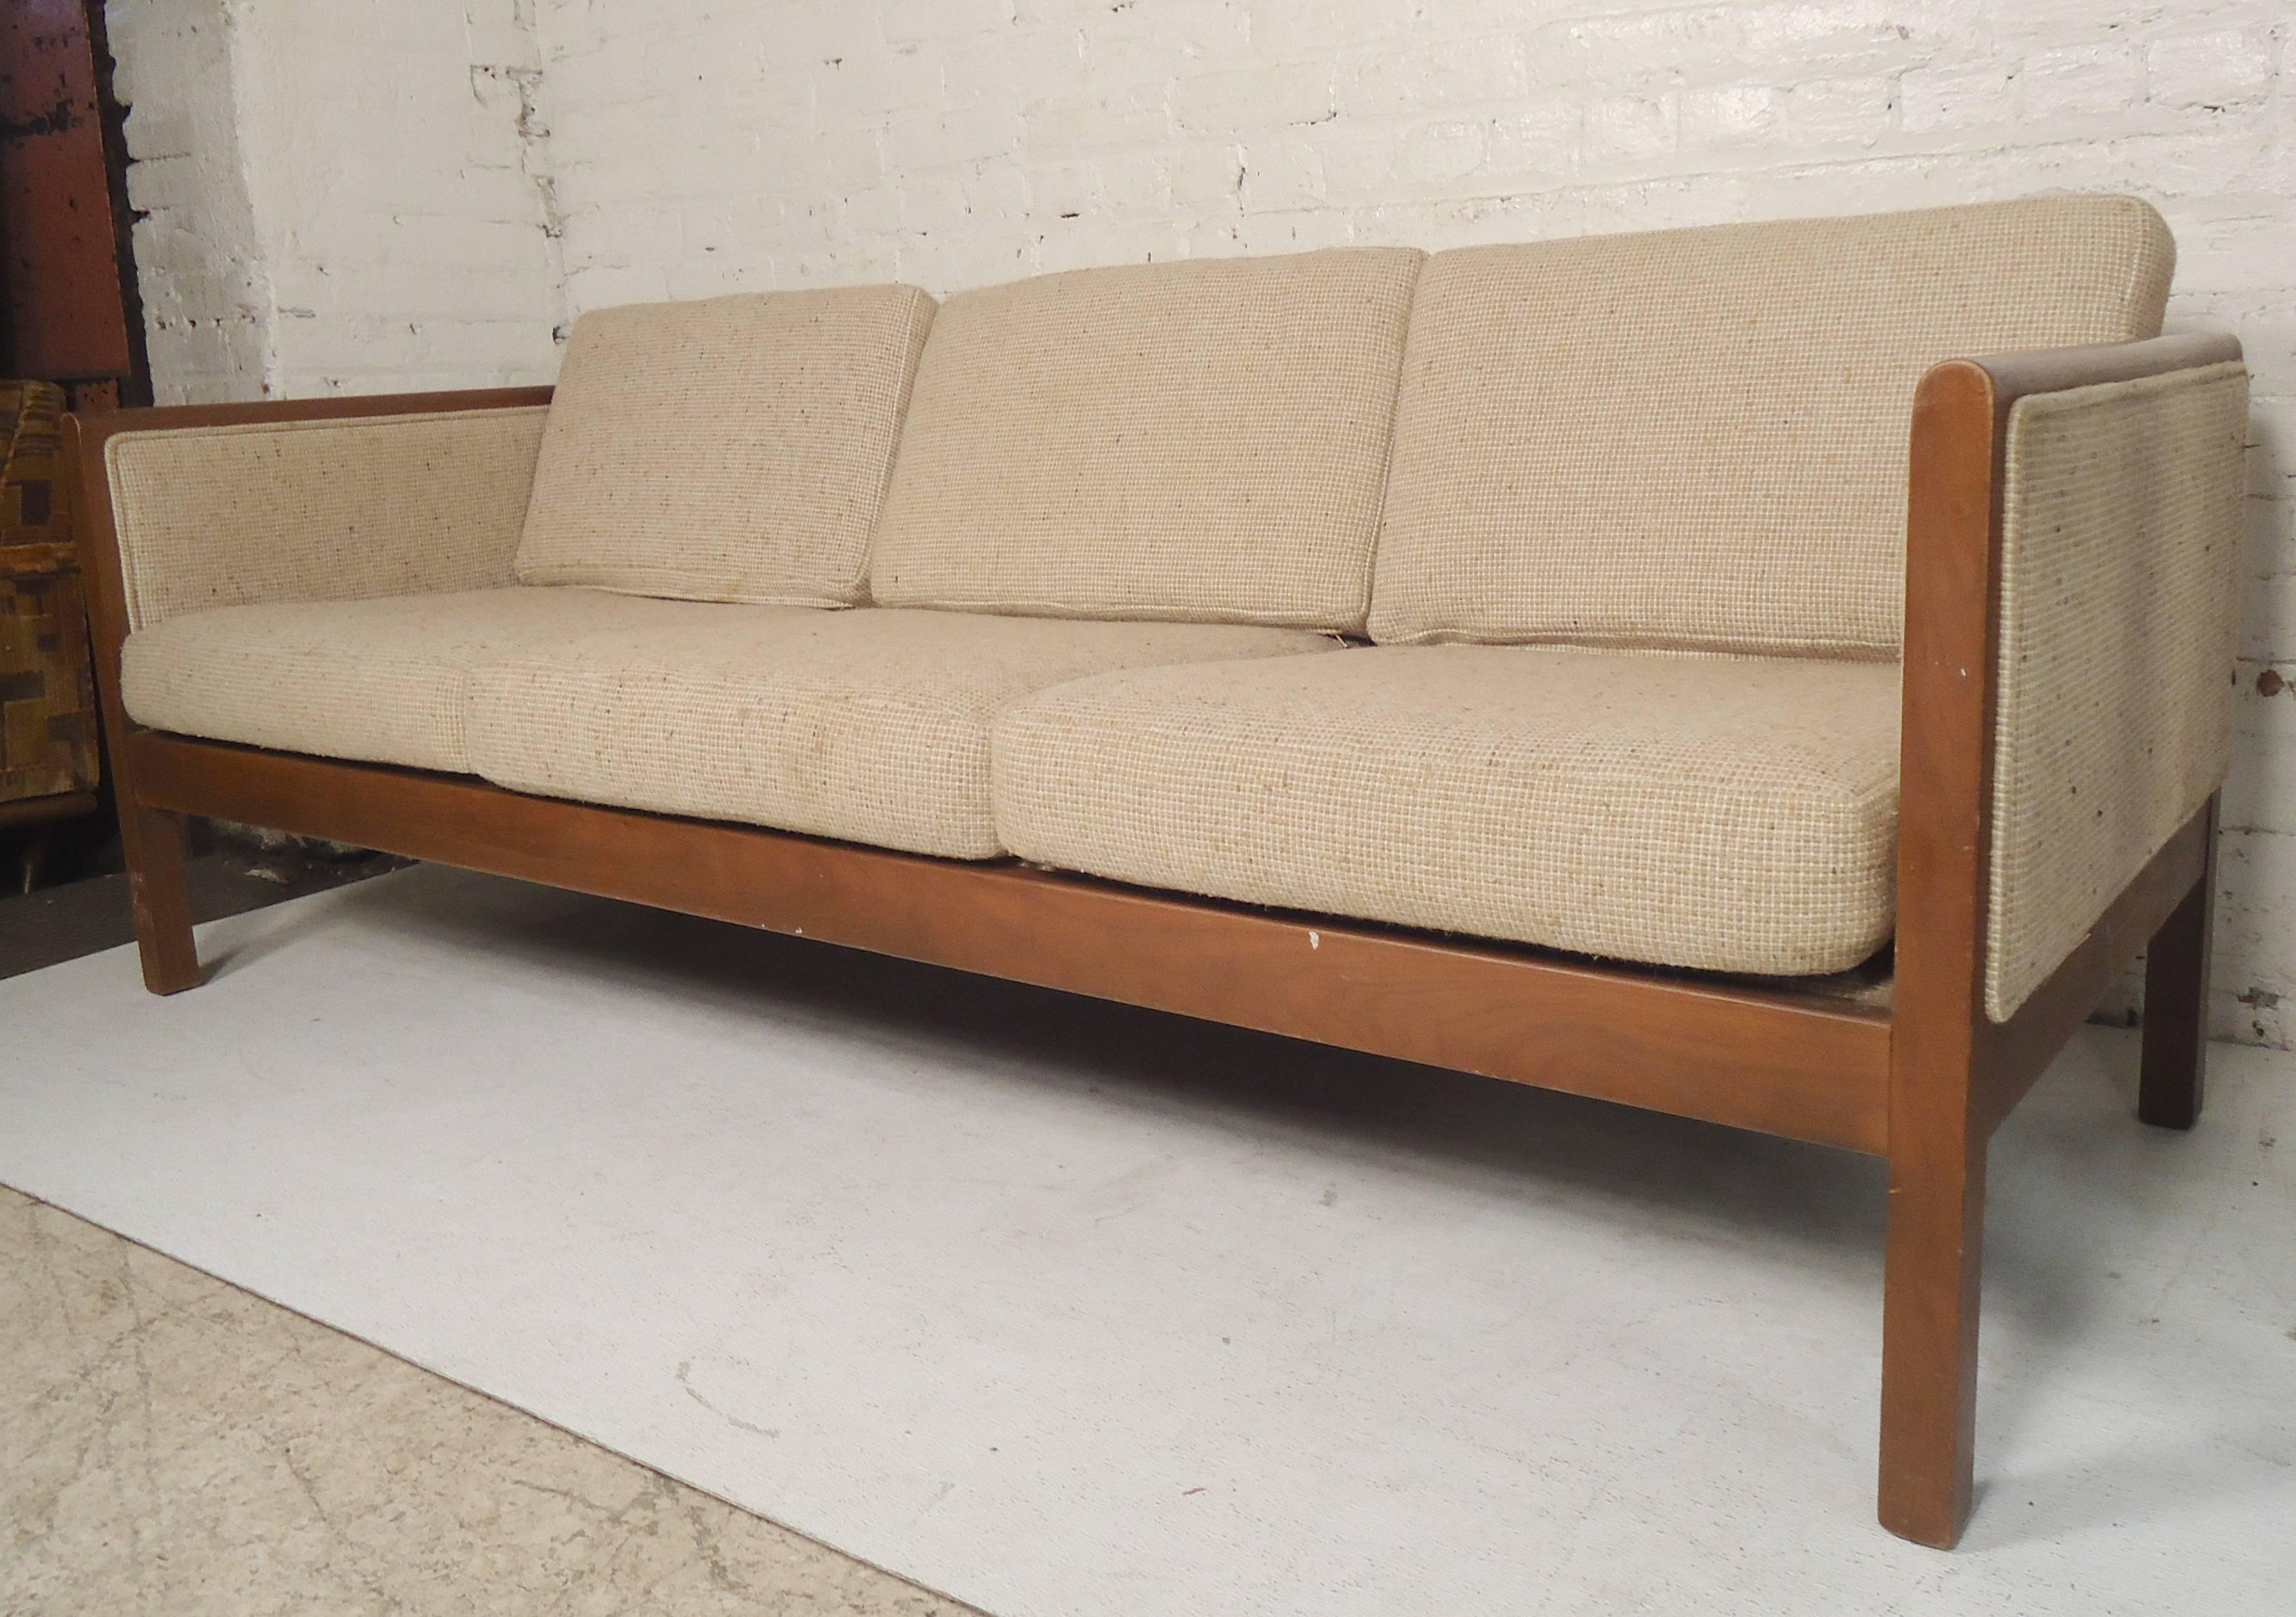 Vintage sofa with walnut trim and upholstered back.

(Please confirm item location - NY or NJ - with dealer).
      